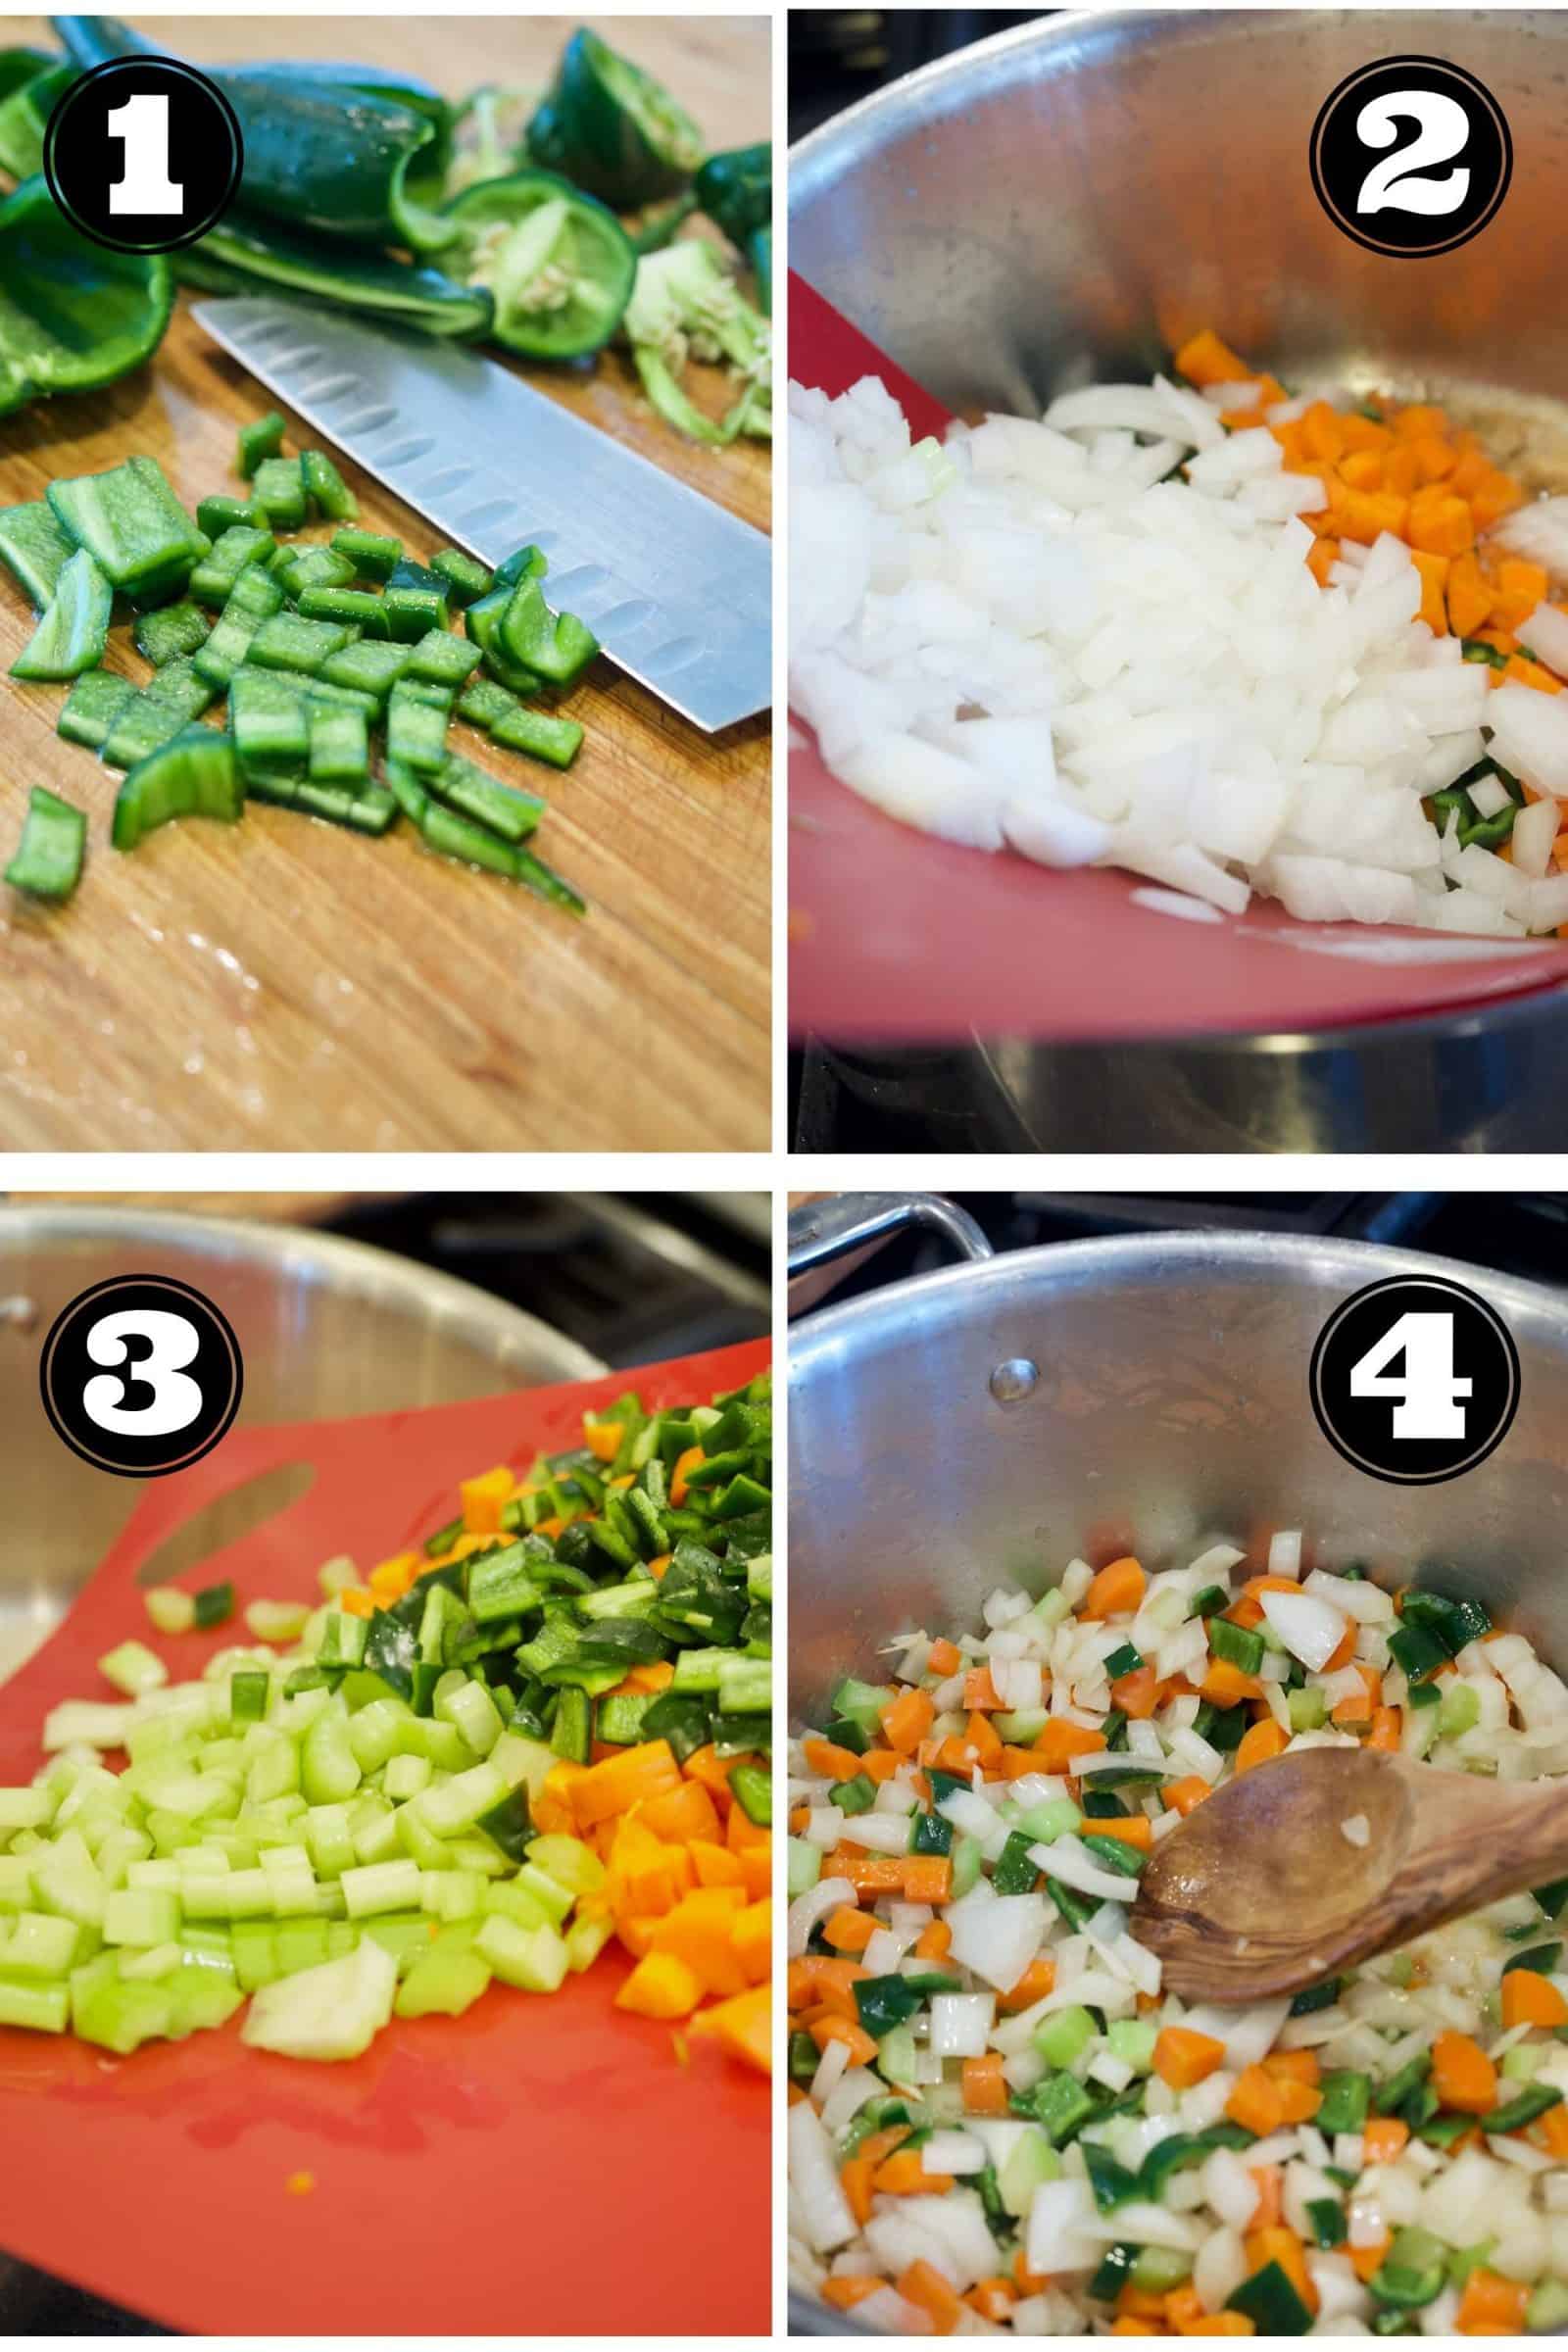 Process shots for Creamy Chicken Poblano Soup. 1. poblano peppers on cutting board with knife, diced. 2. adding diced onions, to butter. 3. Adding celery, carrots and chilis to pot. 4. In soup pot sauteing all of the veggies.